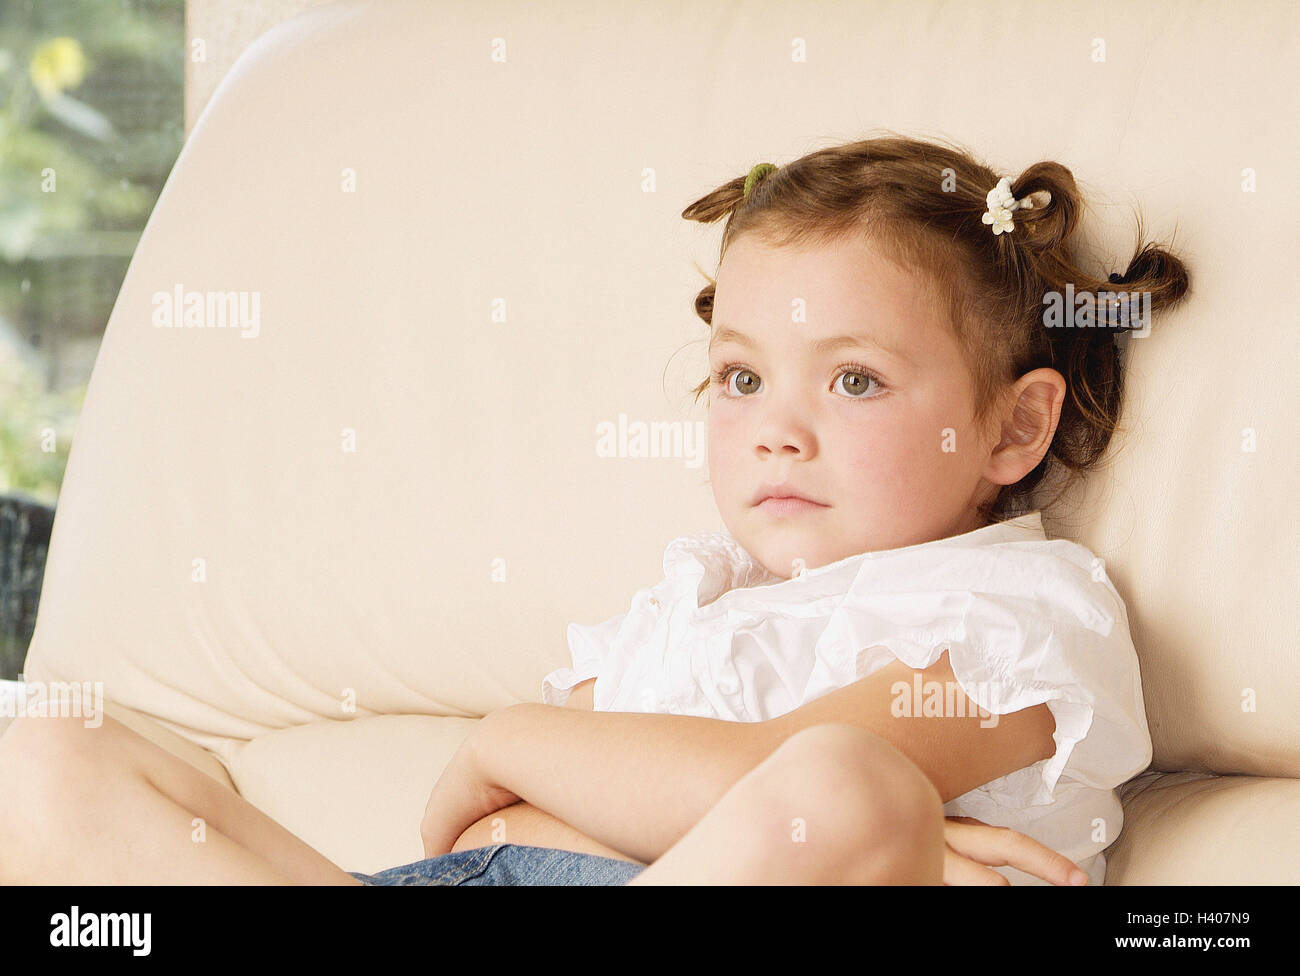 Sofa, detail, girl, excommunicated, portrait, side view, child, child portrait, infant, 4 years, dark-haired, hairstyle, attention, watch TV, television looking, observation, entranced, sitting room, inside, at home, couch Stock Photo